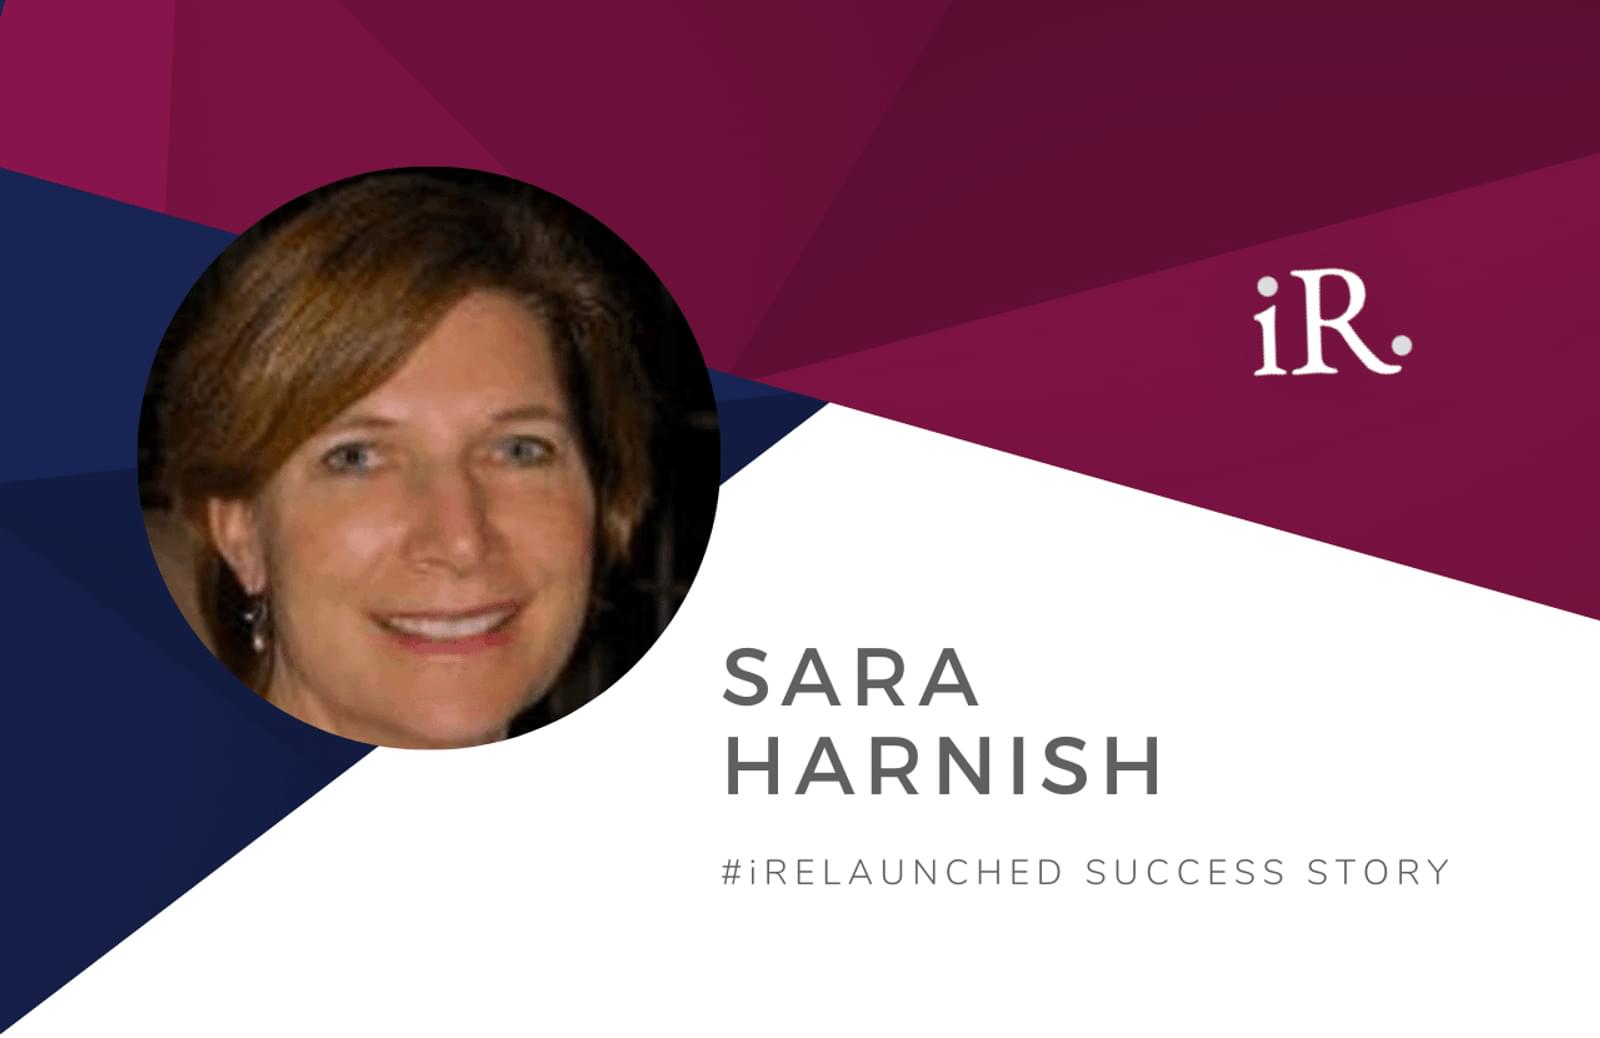 Sara Harnish's headshot and the text #iRelaunched Success Story along with the iRelaunch logo.  A navy and maroon geometric textured background intersect behind Sara's headshot.